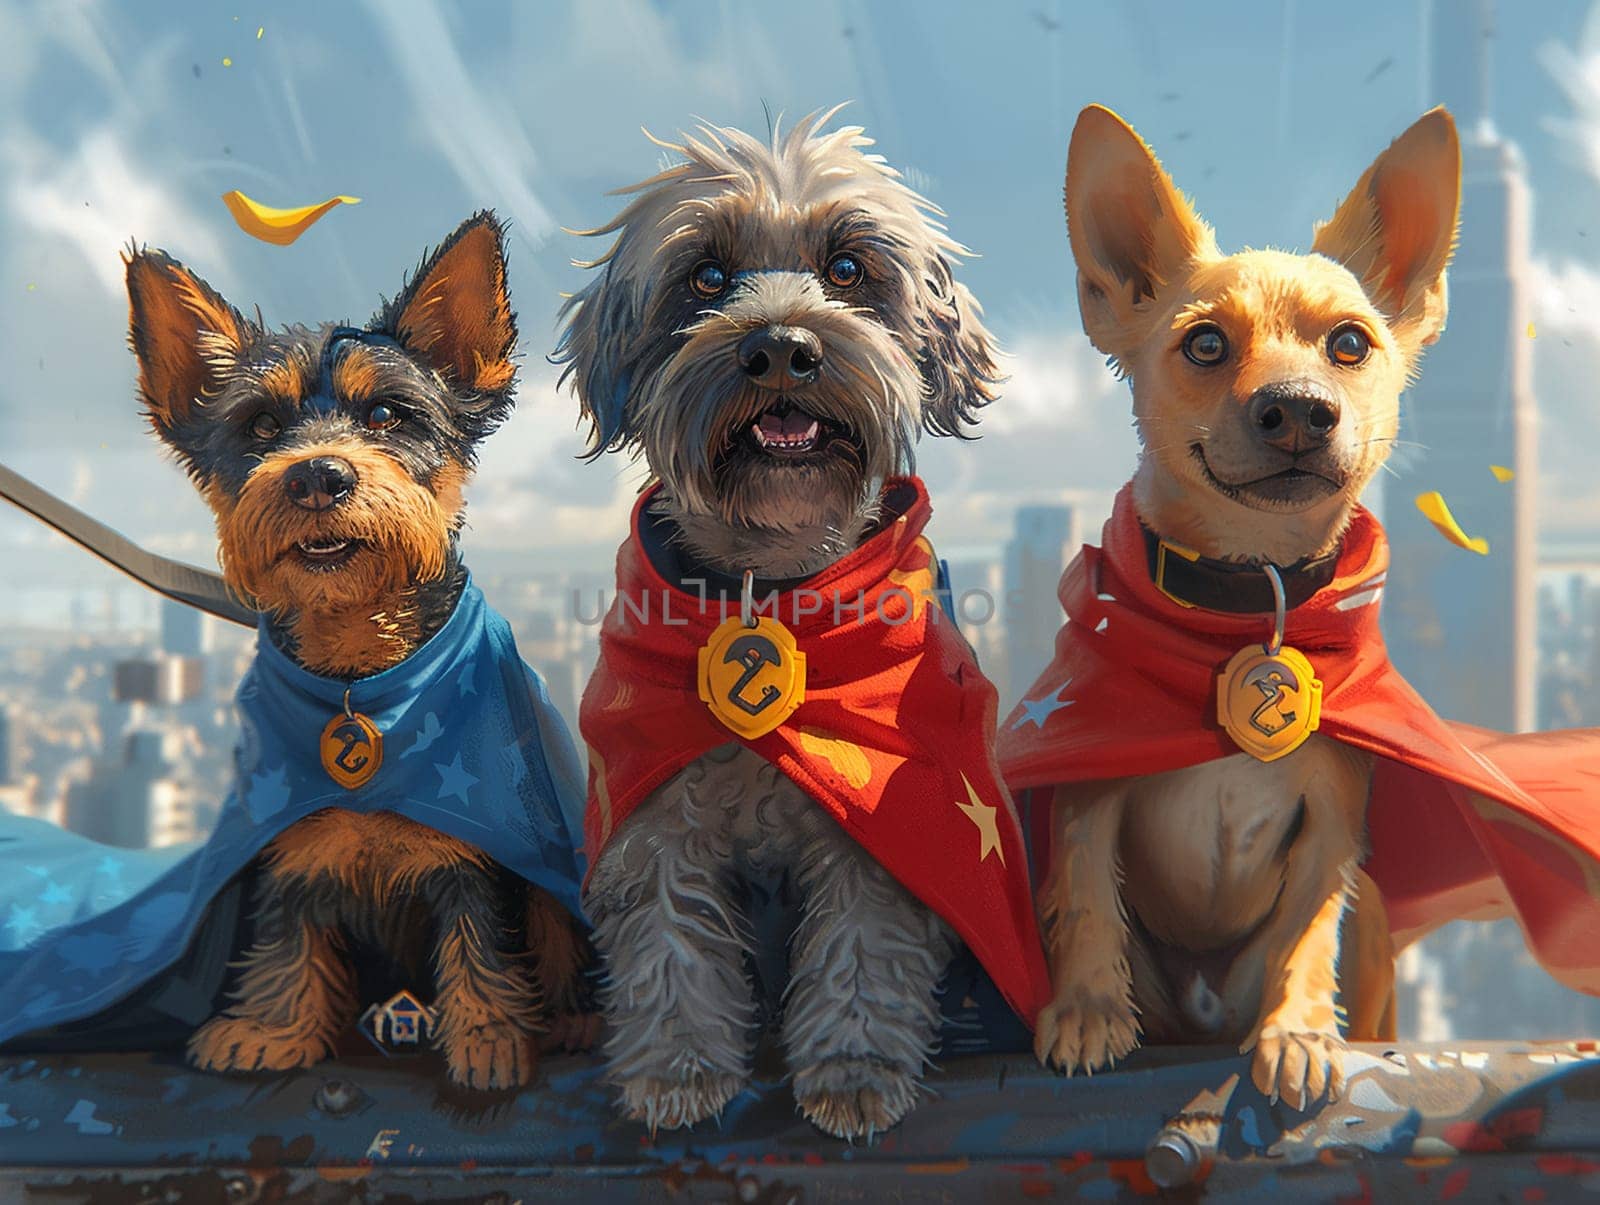 Animal heroes in cartoon style, adding brightness with courageous characters and heroic deeds.